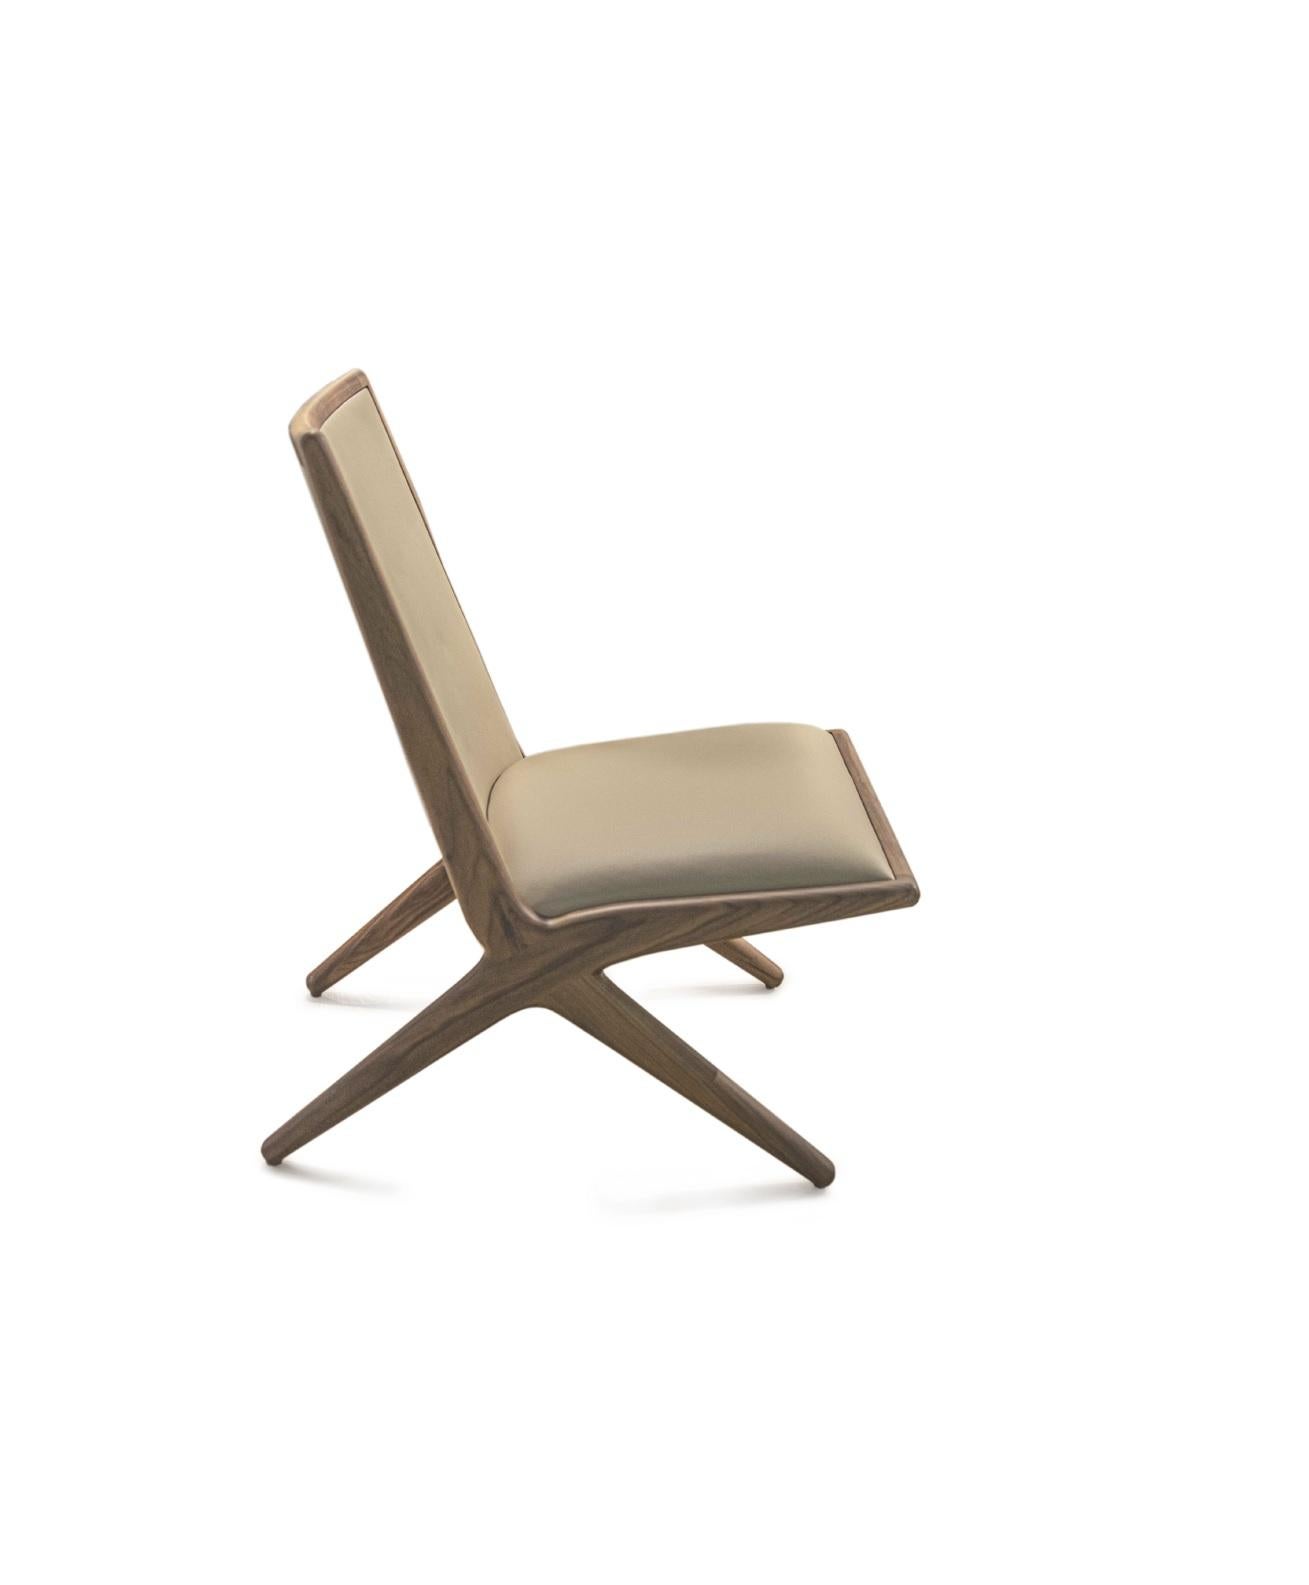 Oak Kaya lounge chair by LK Edition
Dimensions: 75.7 x 68 x H 86.3 cm
Materials: Oak. Leather. 
Also available in walnut and without leather.

It is with the sense of detail and requirement, this research of the exception by the selection of